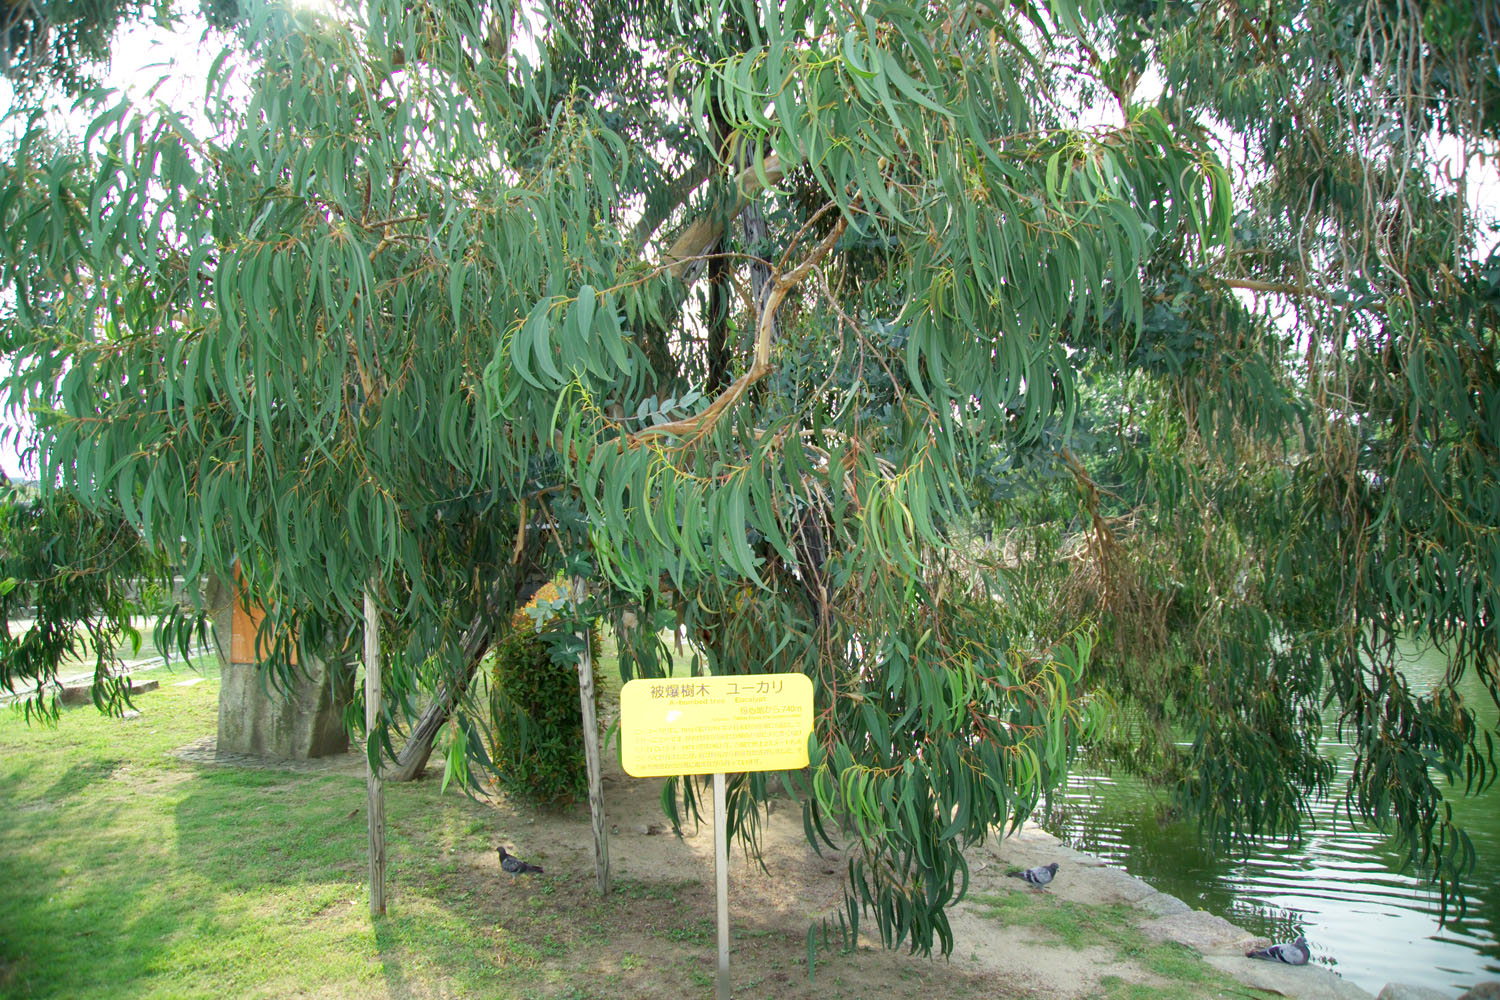 A decades-old eucalyptus tree at the site of Hiroshima Castle, 740 meters (2,427 feet) from the atomic bomb’s hypocenter.